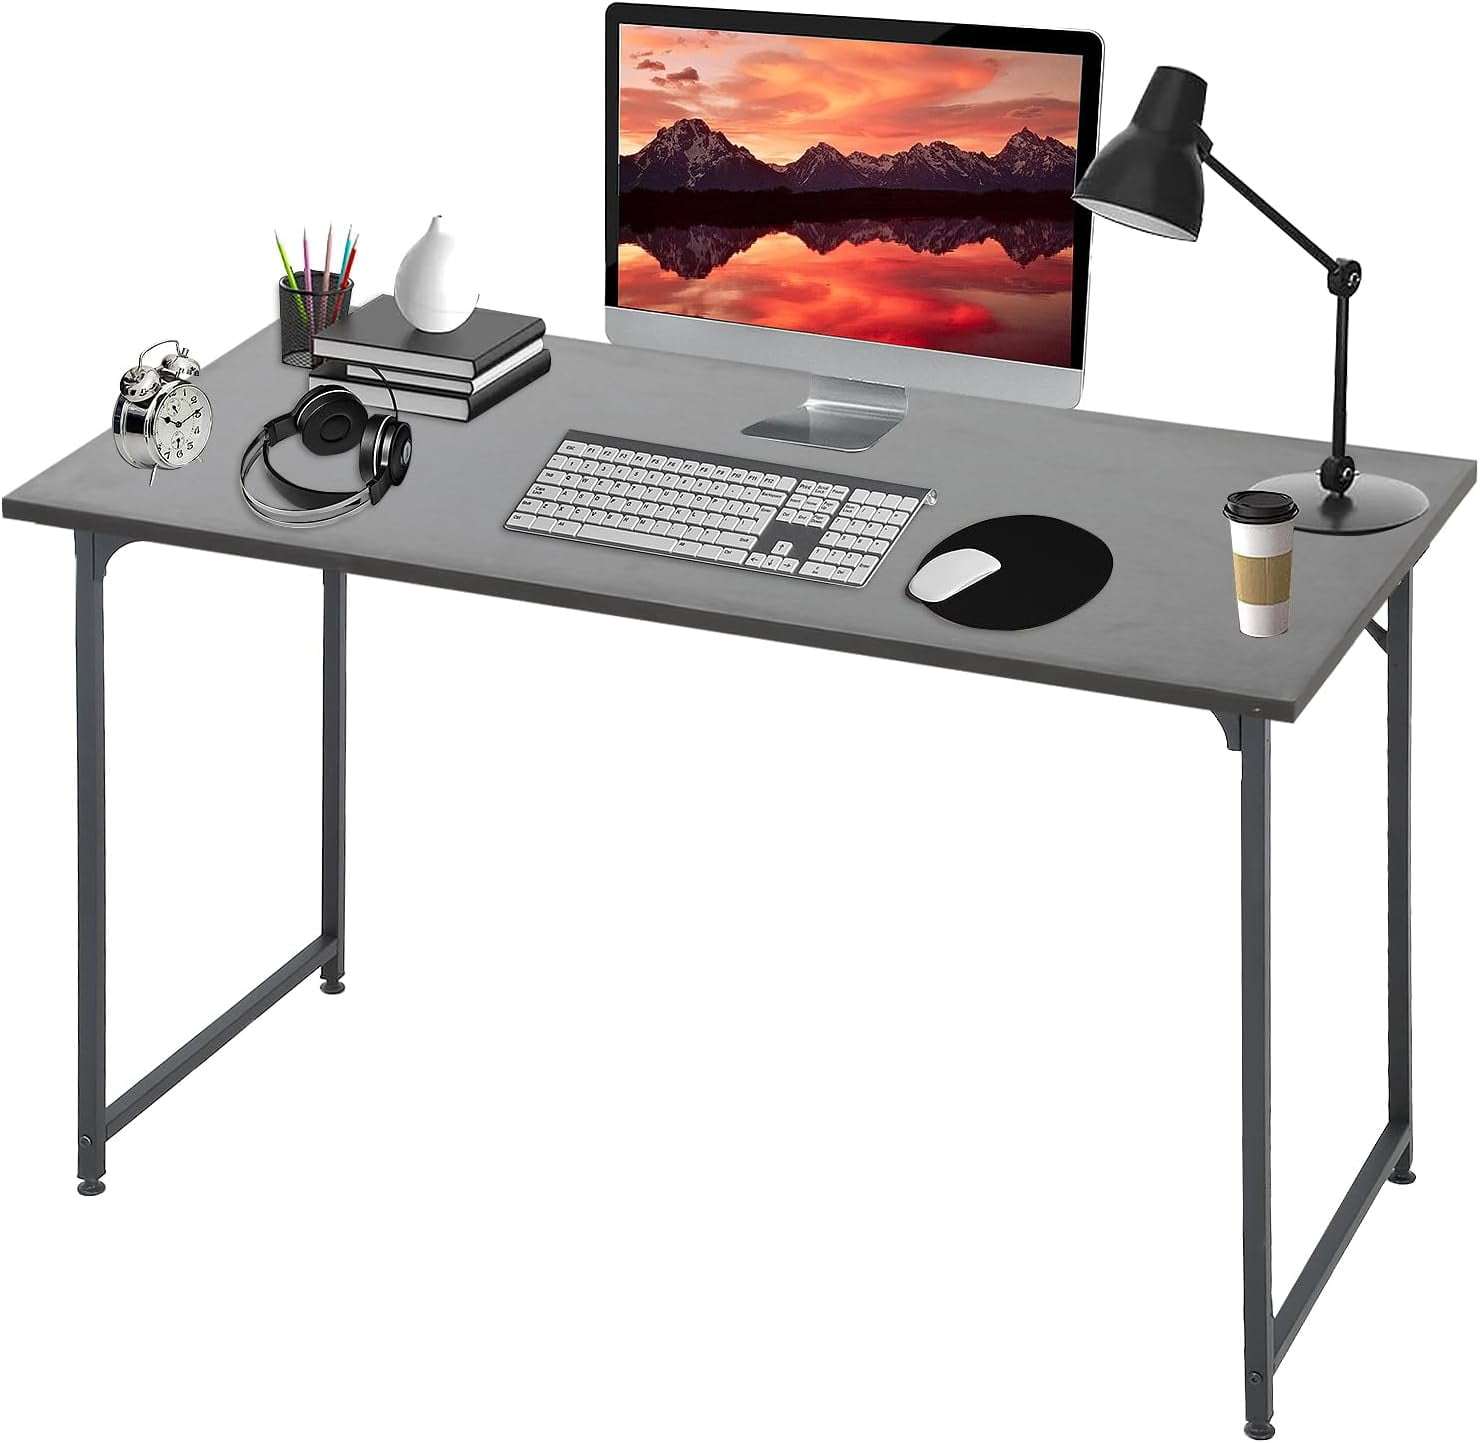 PayLessHere 47 inch Computer Desk Modern Writing Desk, Simple Study Table,  Industrial Office Desk, Sturdy Laptop Table for Home Office, Black